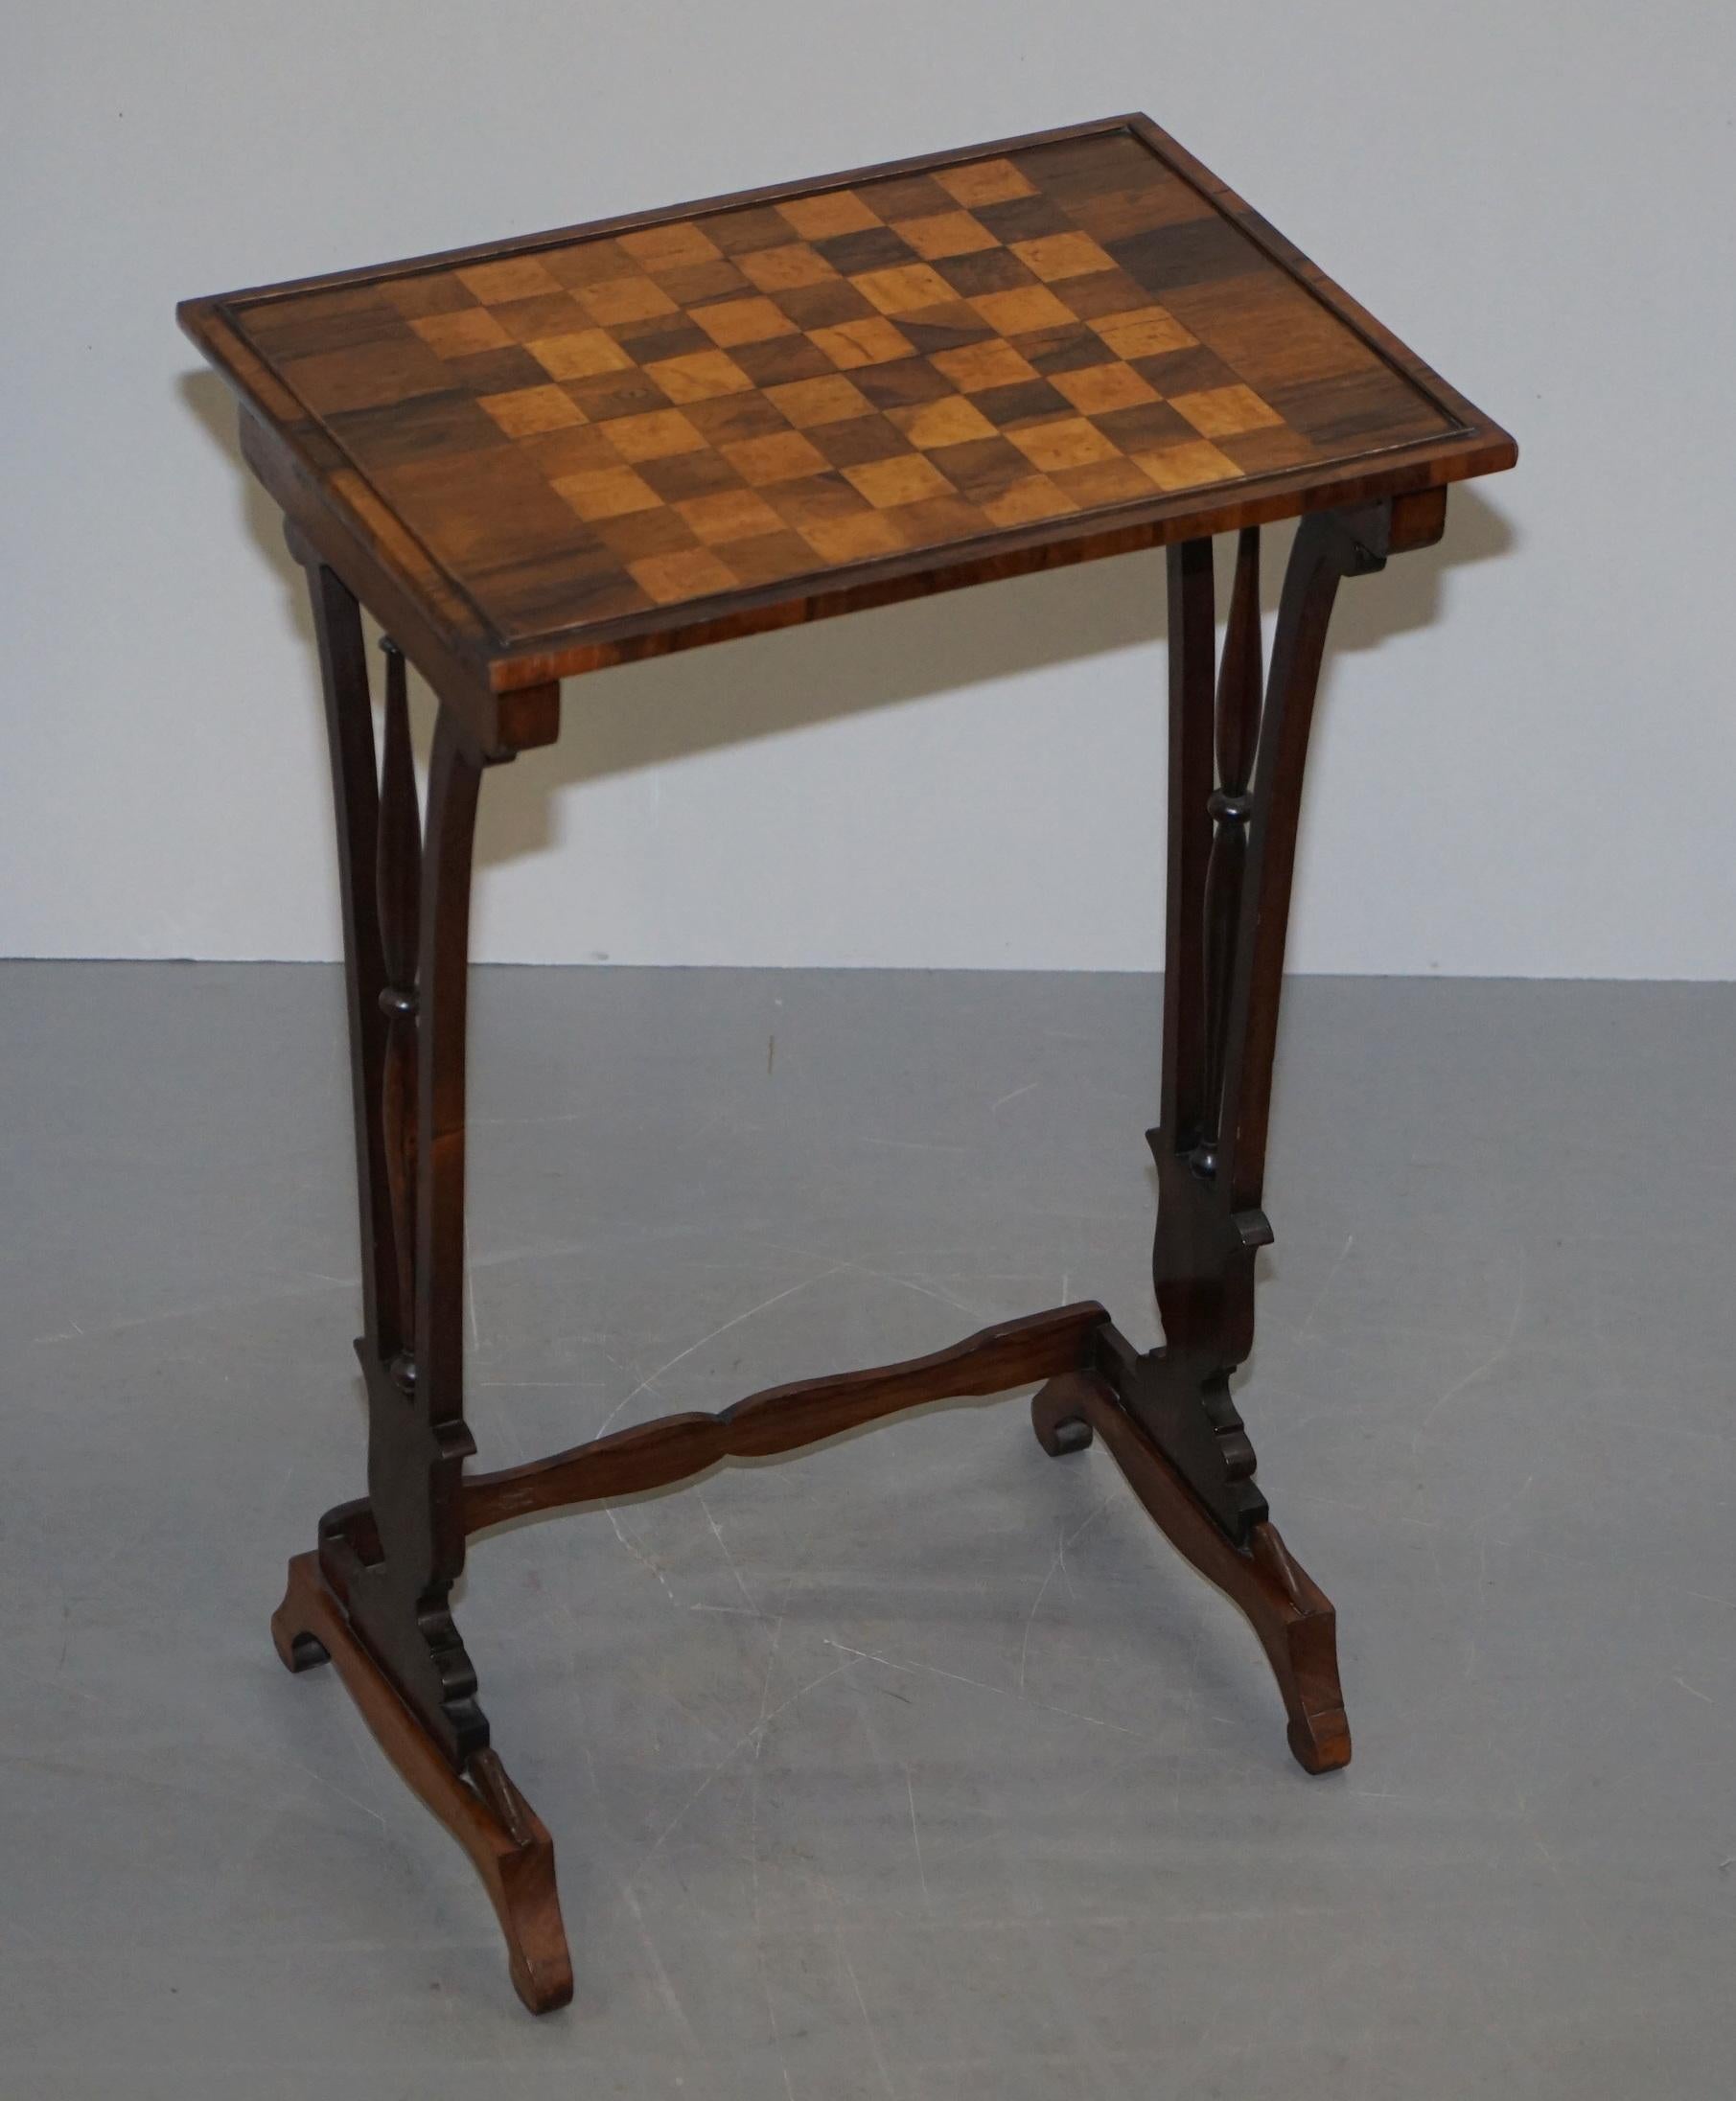 Early 19th Century Fine Regency Nest of Hardwood Tables with Chessboard Top Attributed to Gillows For Sale